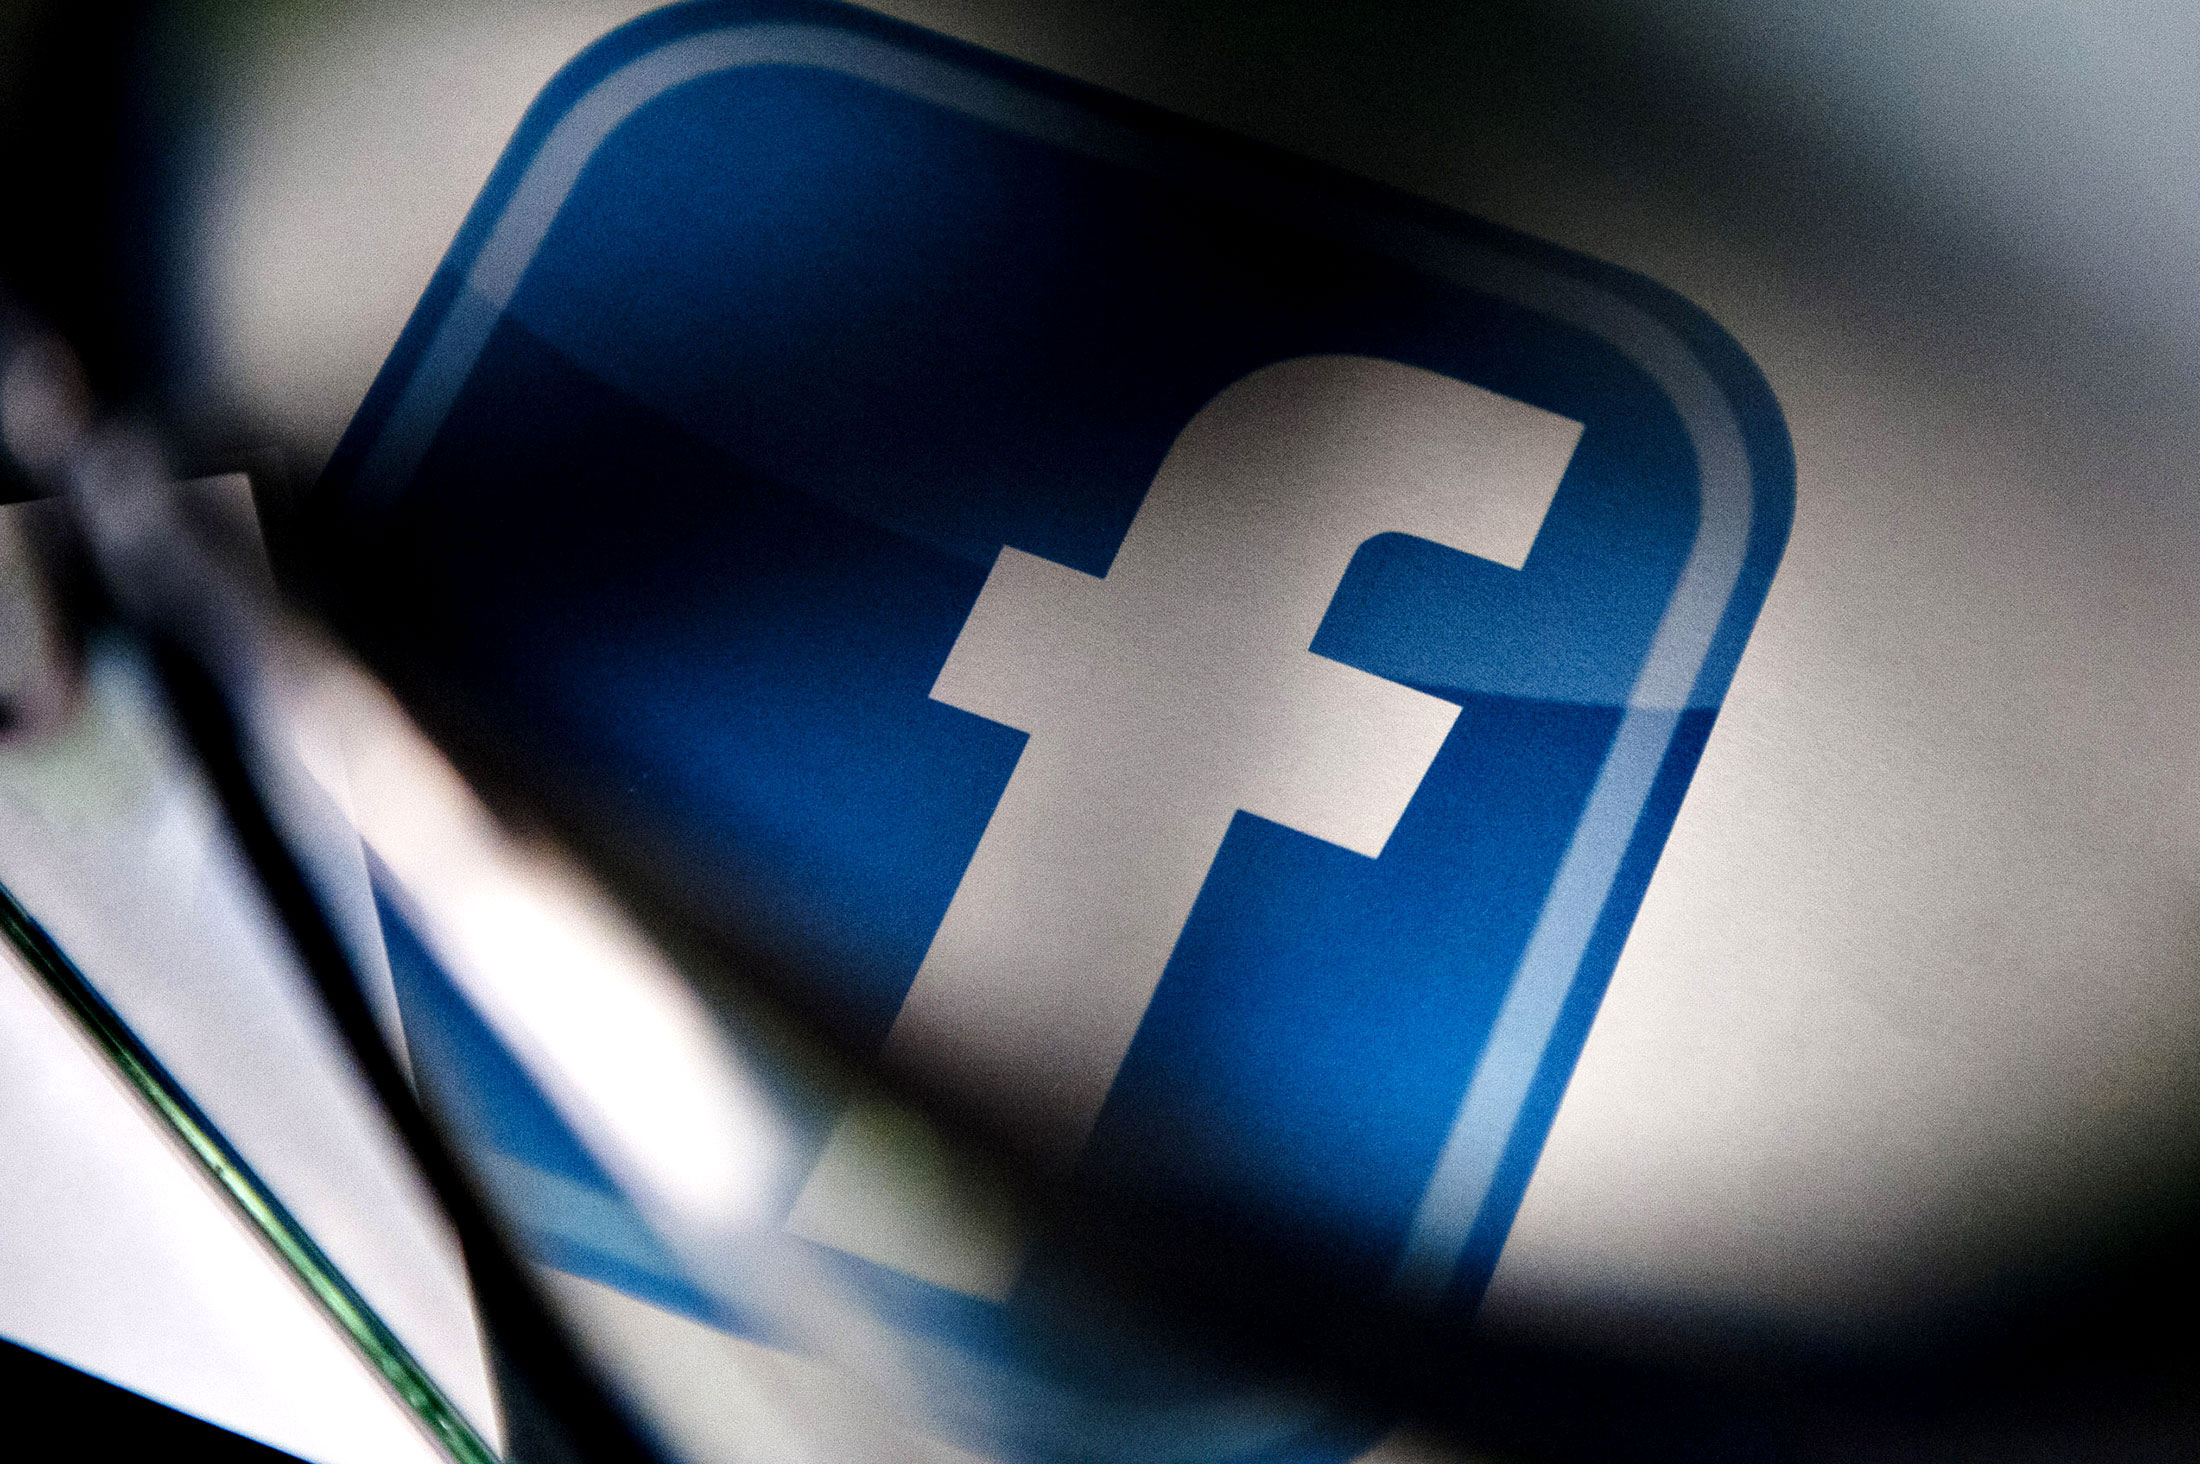 A Facebook Inc. logo is displayed for a photograph in Tiskilwa, Illinois, U.S., on Tuesday, Jan. 29, 2013. Facebook Inc. is scheduled to report quarterly earnings on Jan. 30.
